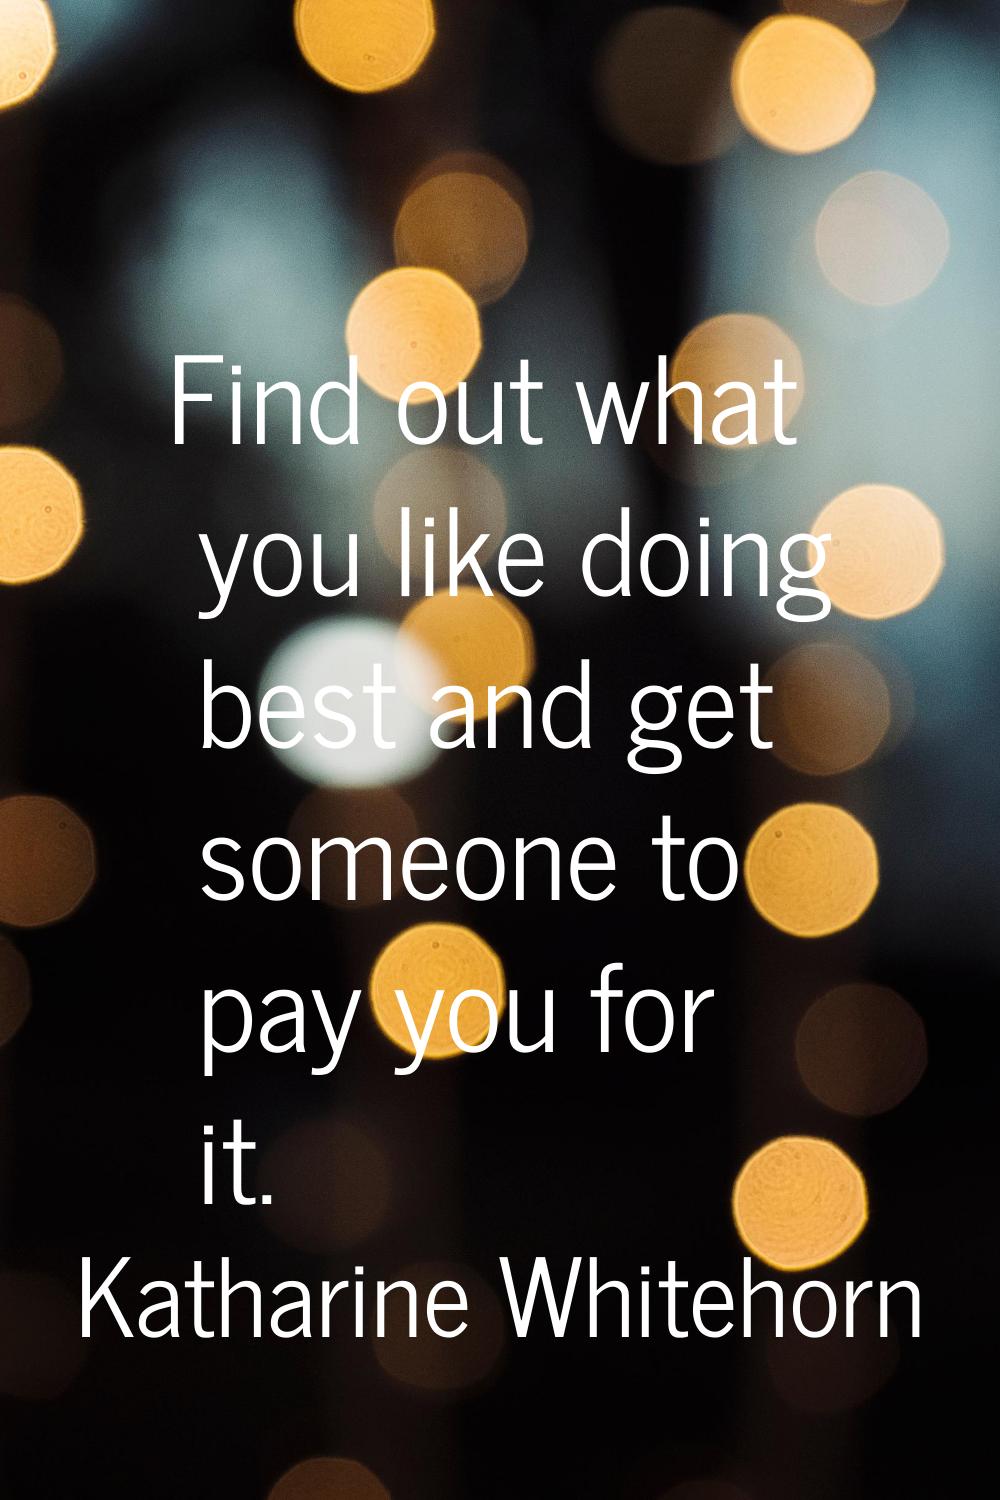 Find out what you like doing best and get someone to pay you for it.